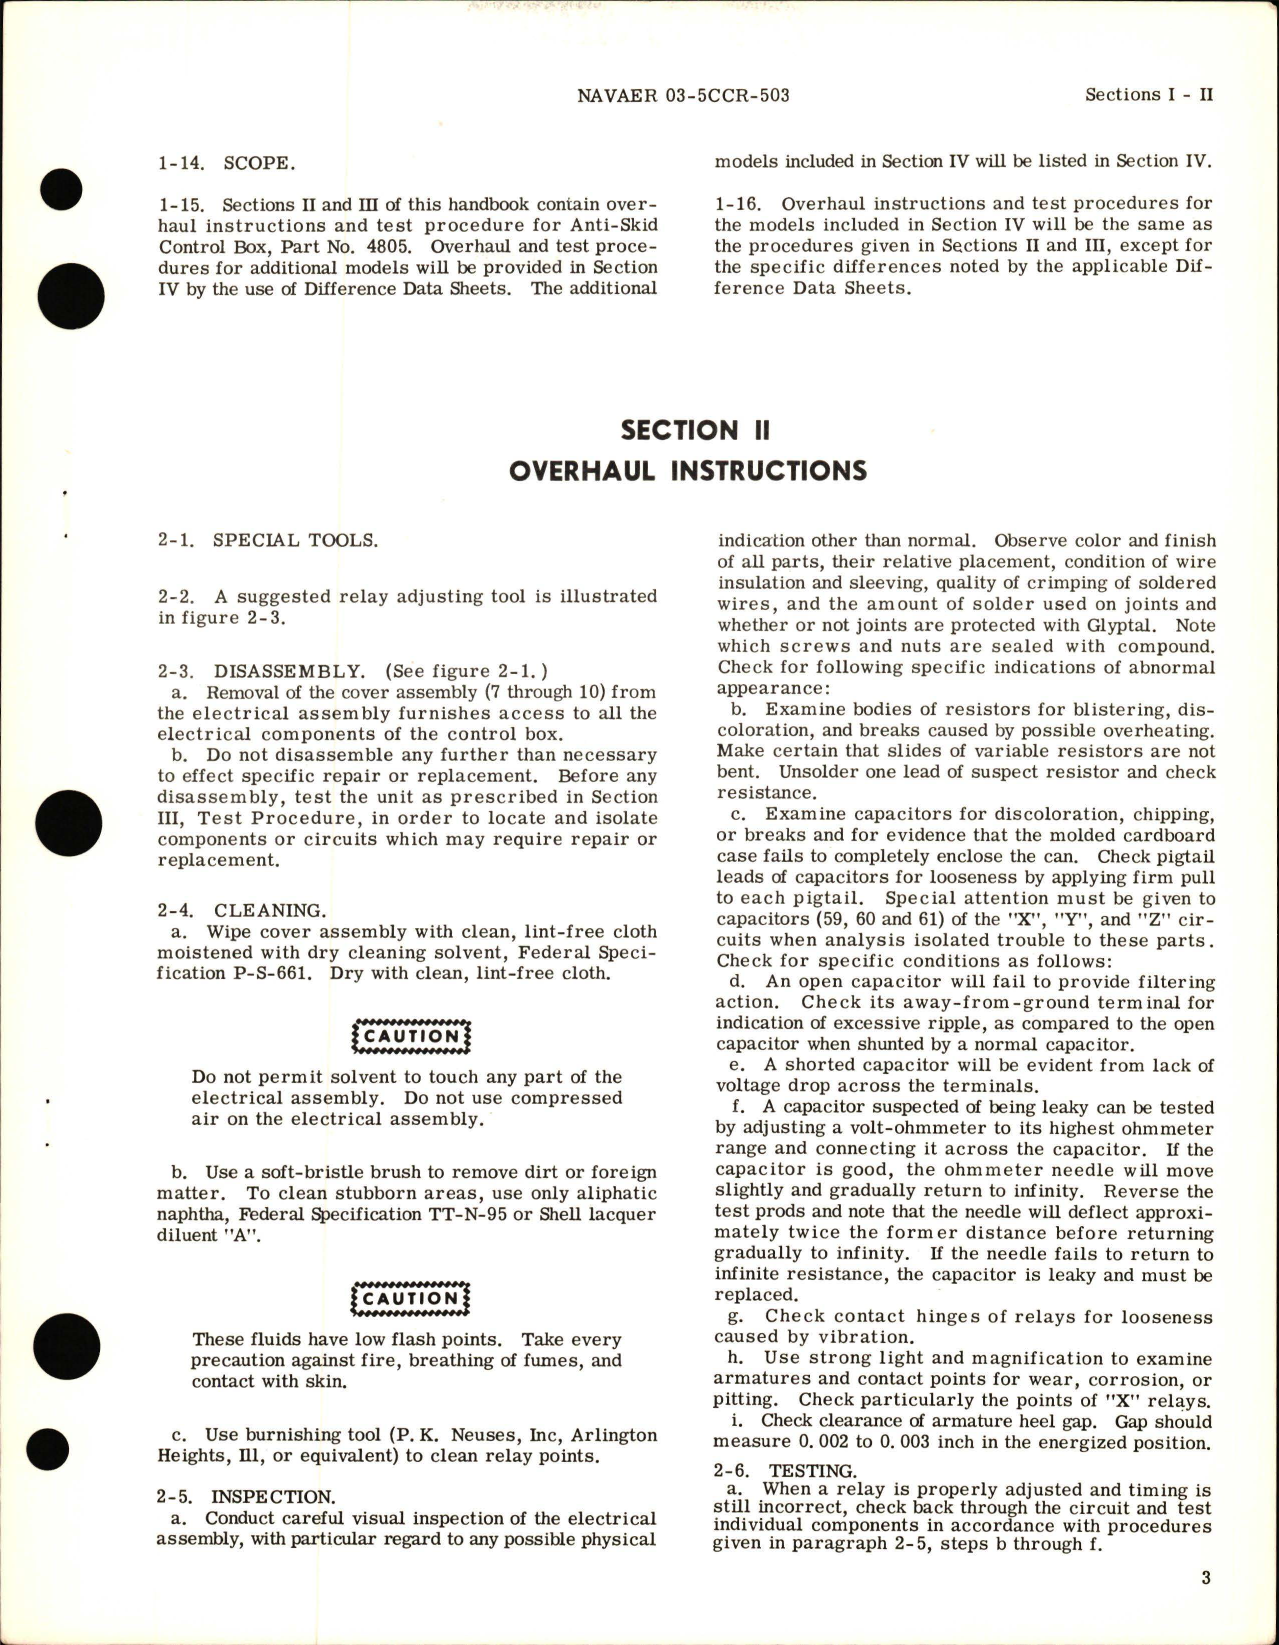 Sample page 5 from AirCorps Library document: Overhaul Instructions for Anti-Skid Control Box - Part 4805 